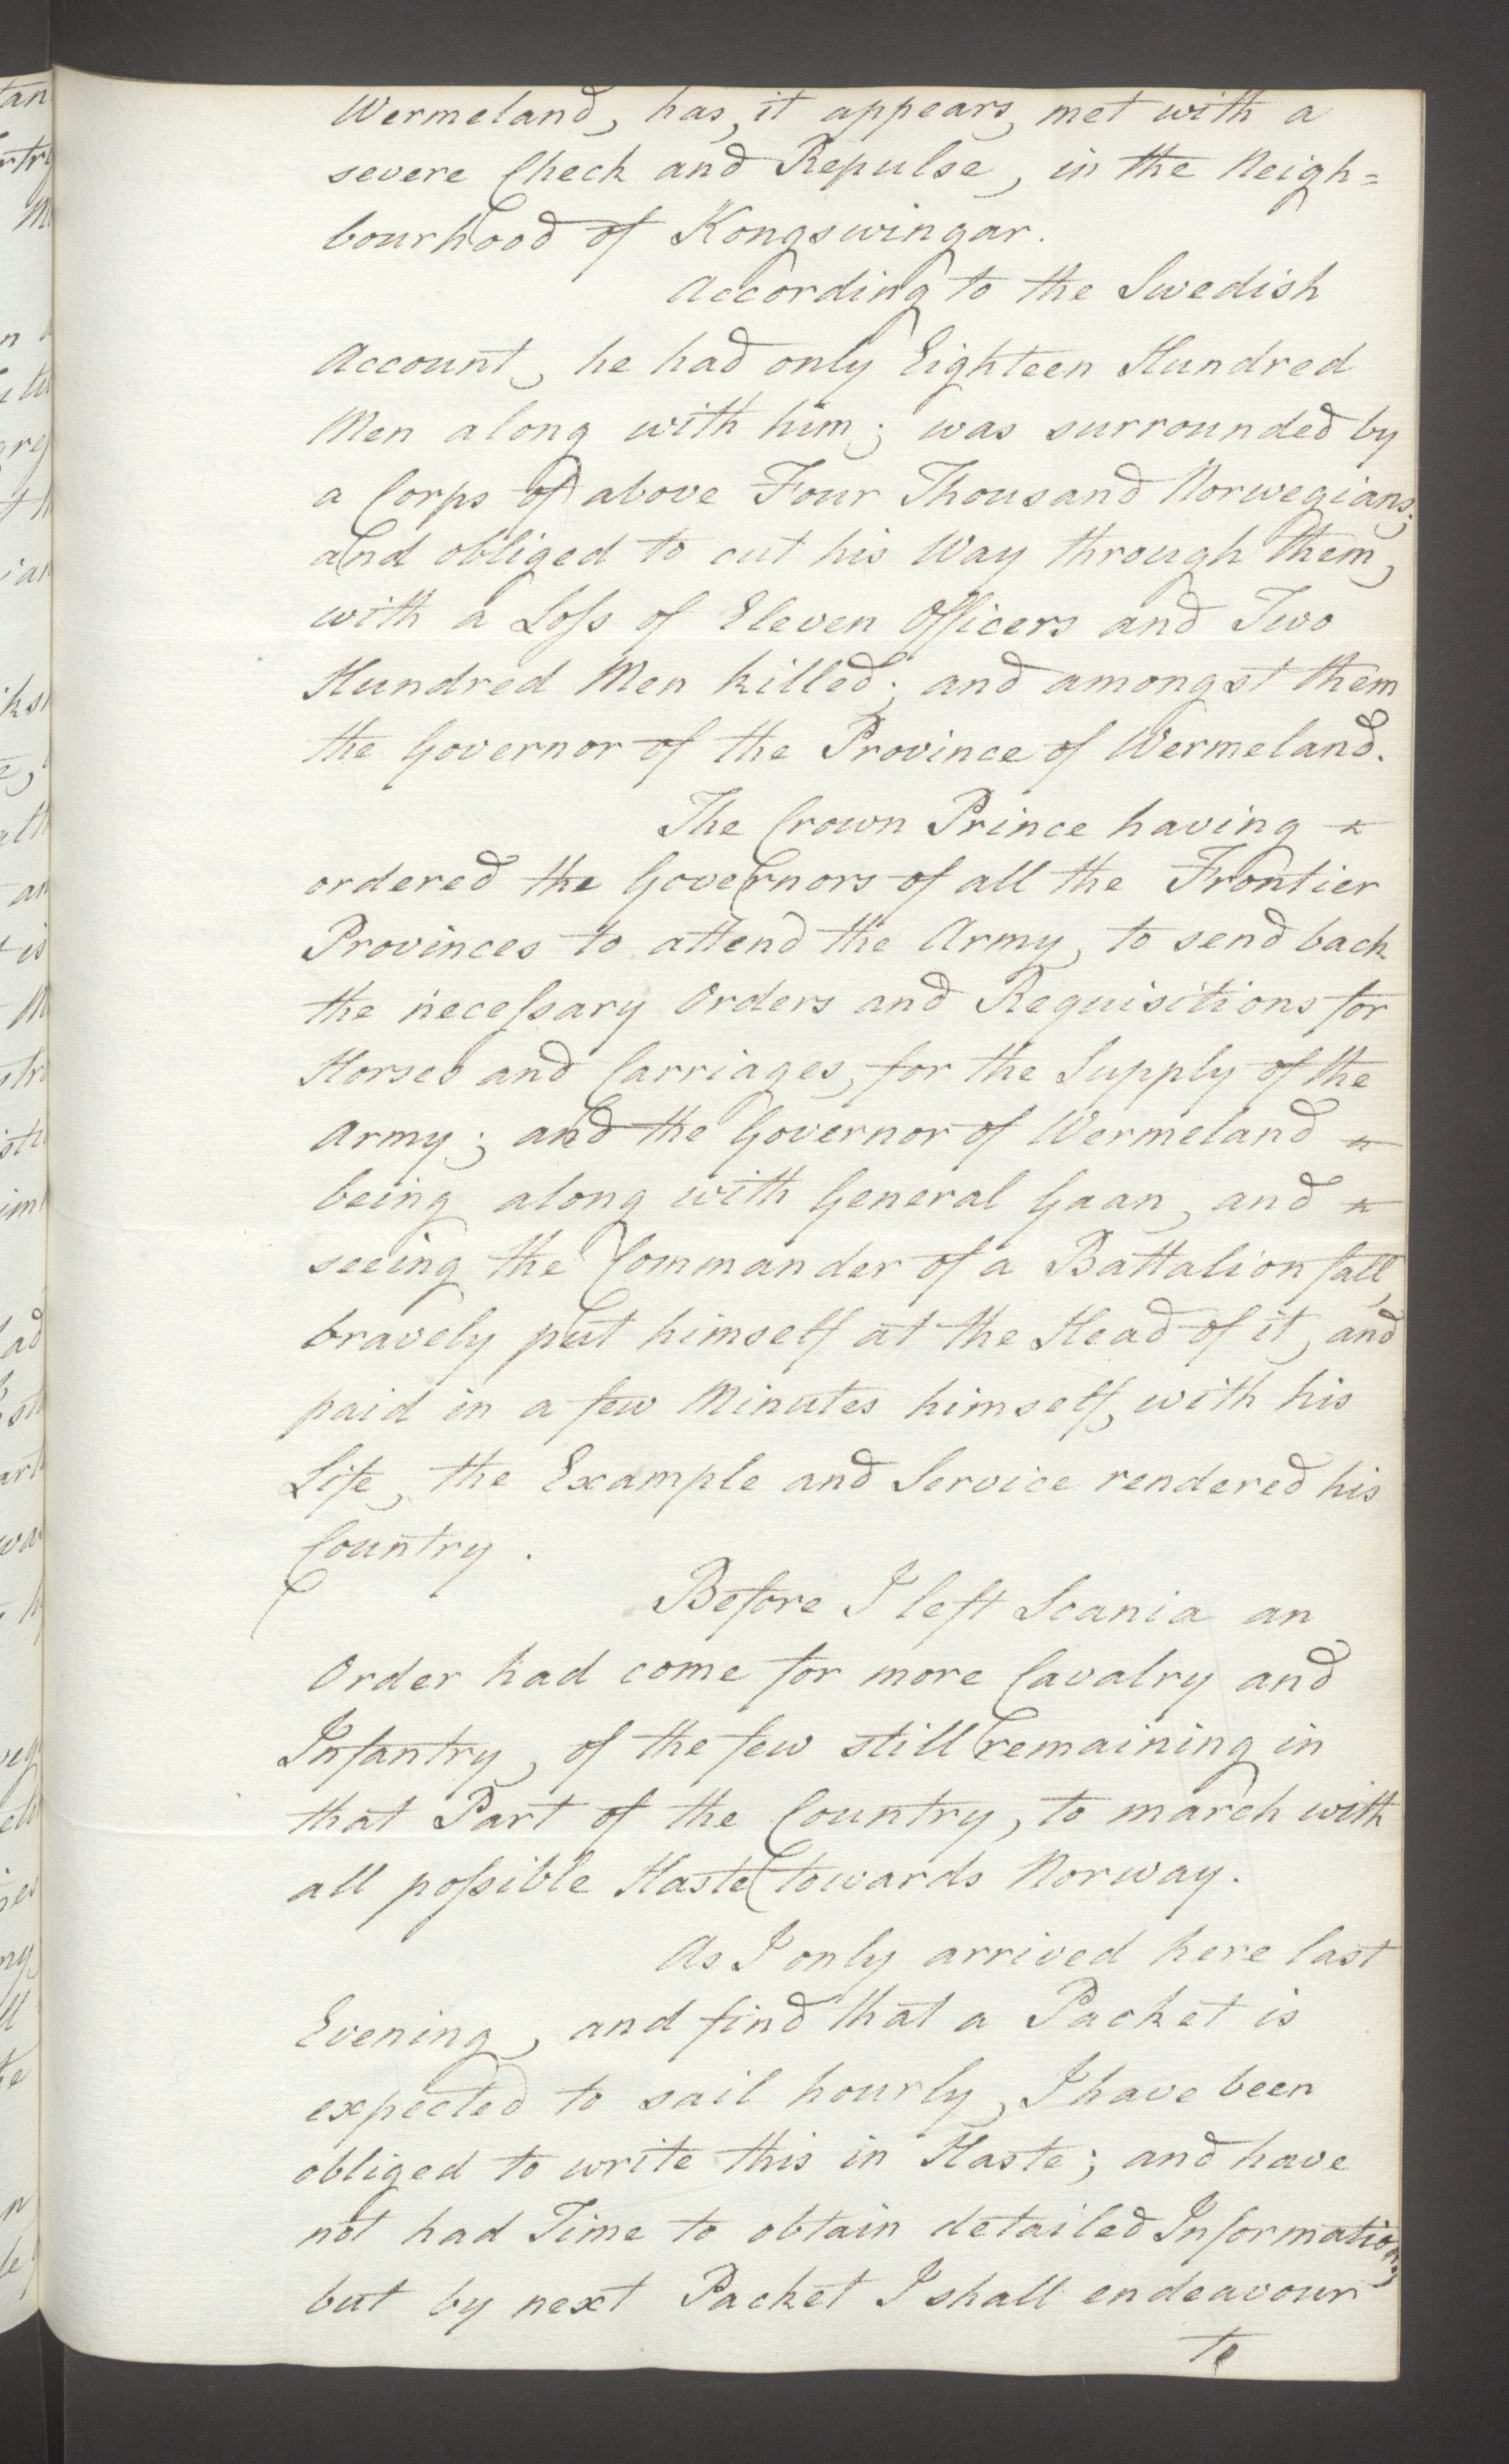 Foreign Office*, UKA/-/FO 38/16: Sir C. Gordon. Reports from Malmö, Jonkoping, and Helsingborg, 1814, s. 81